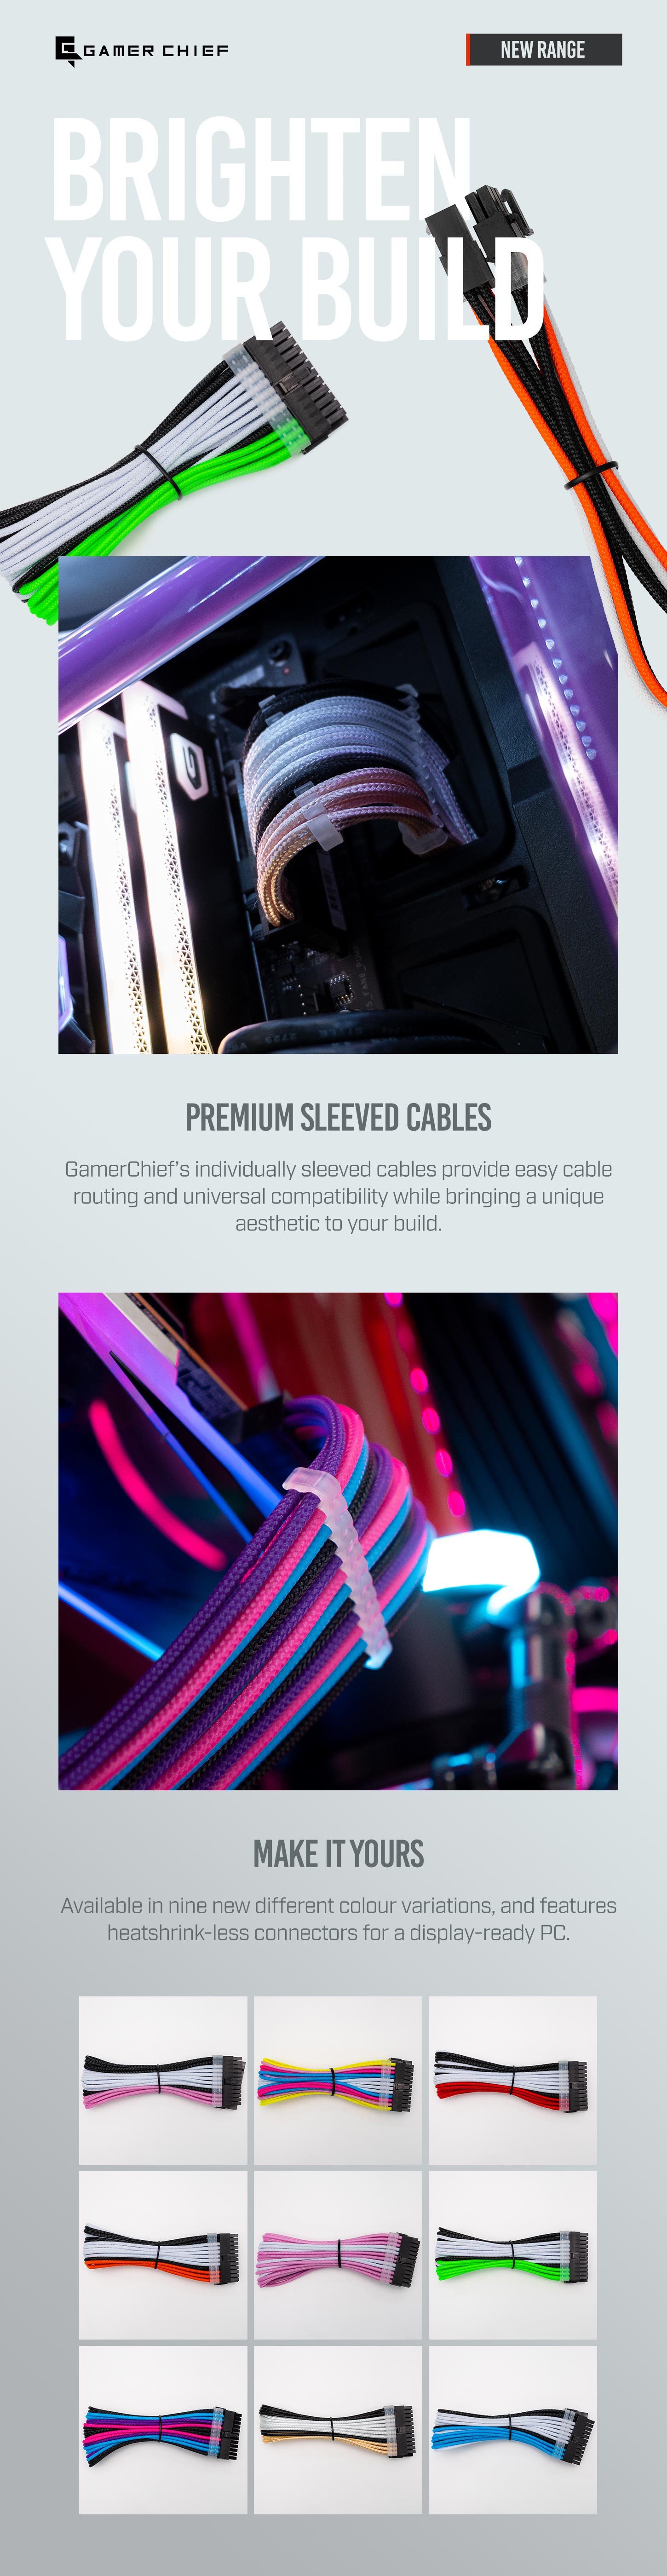 A large marketing image providing additional information about the product GamerChief Elite Series 6-Pin PCIe 30cm Sleeved Extension Cable (Pink/White) - Additional alt info not provided